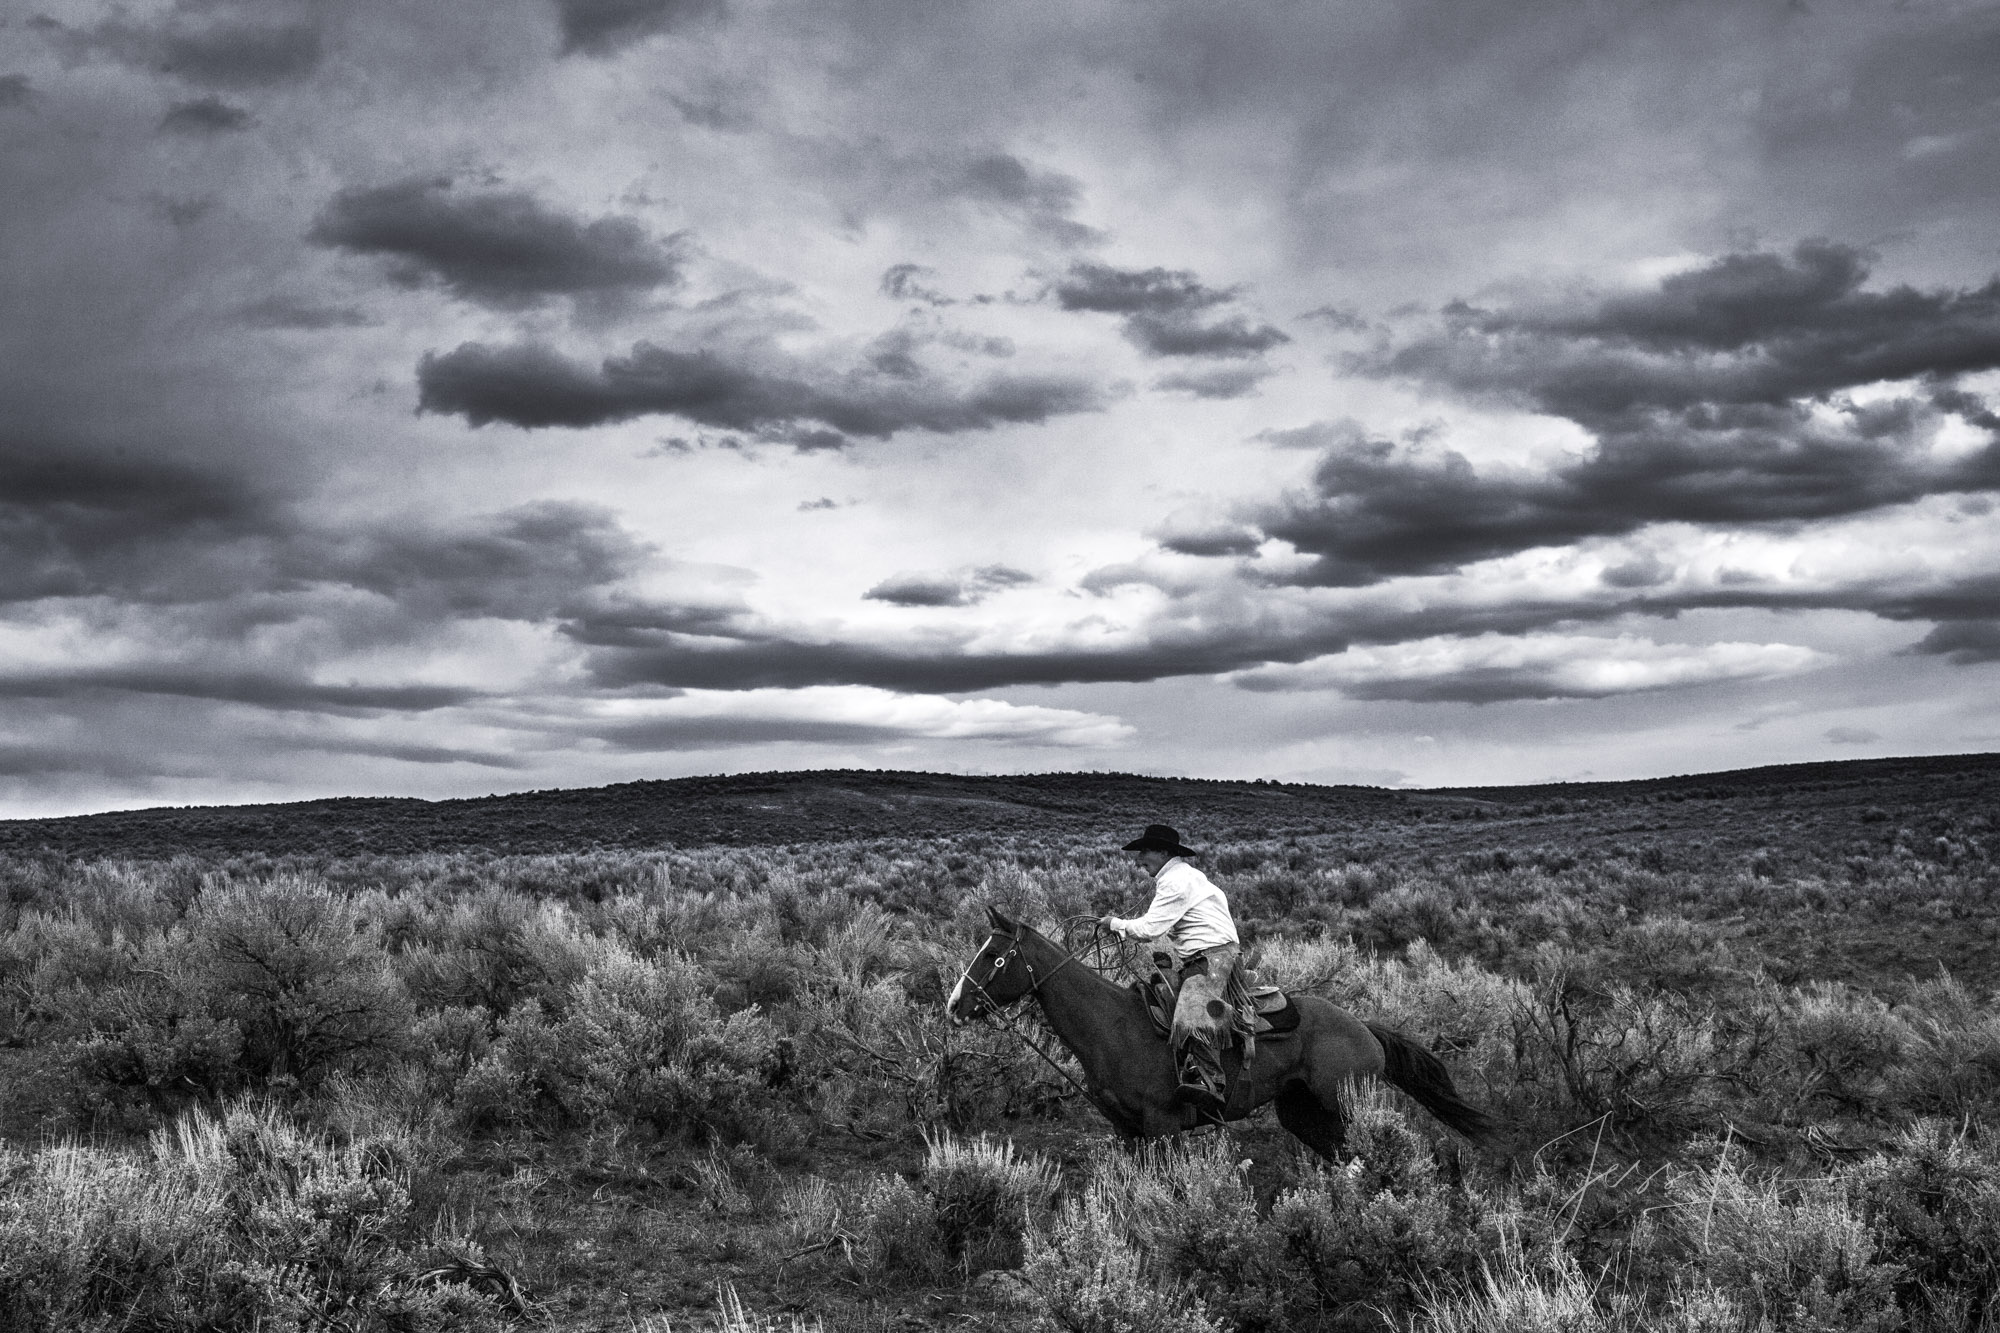 Fine Art Limited Edition Photo Prints of Cowboys, Horses, and life in the West.  Cowboy pictures in black and white. Range Rider...